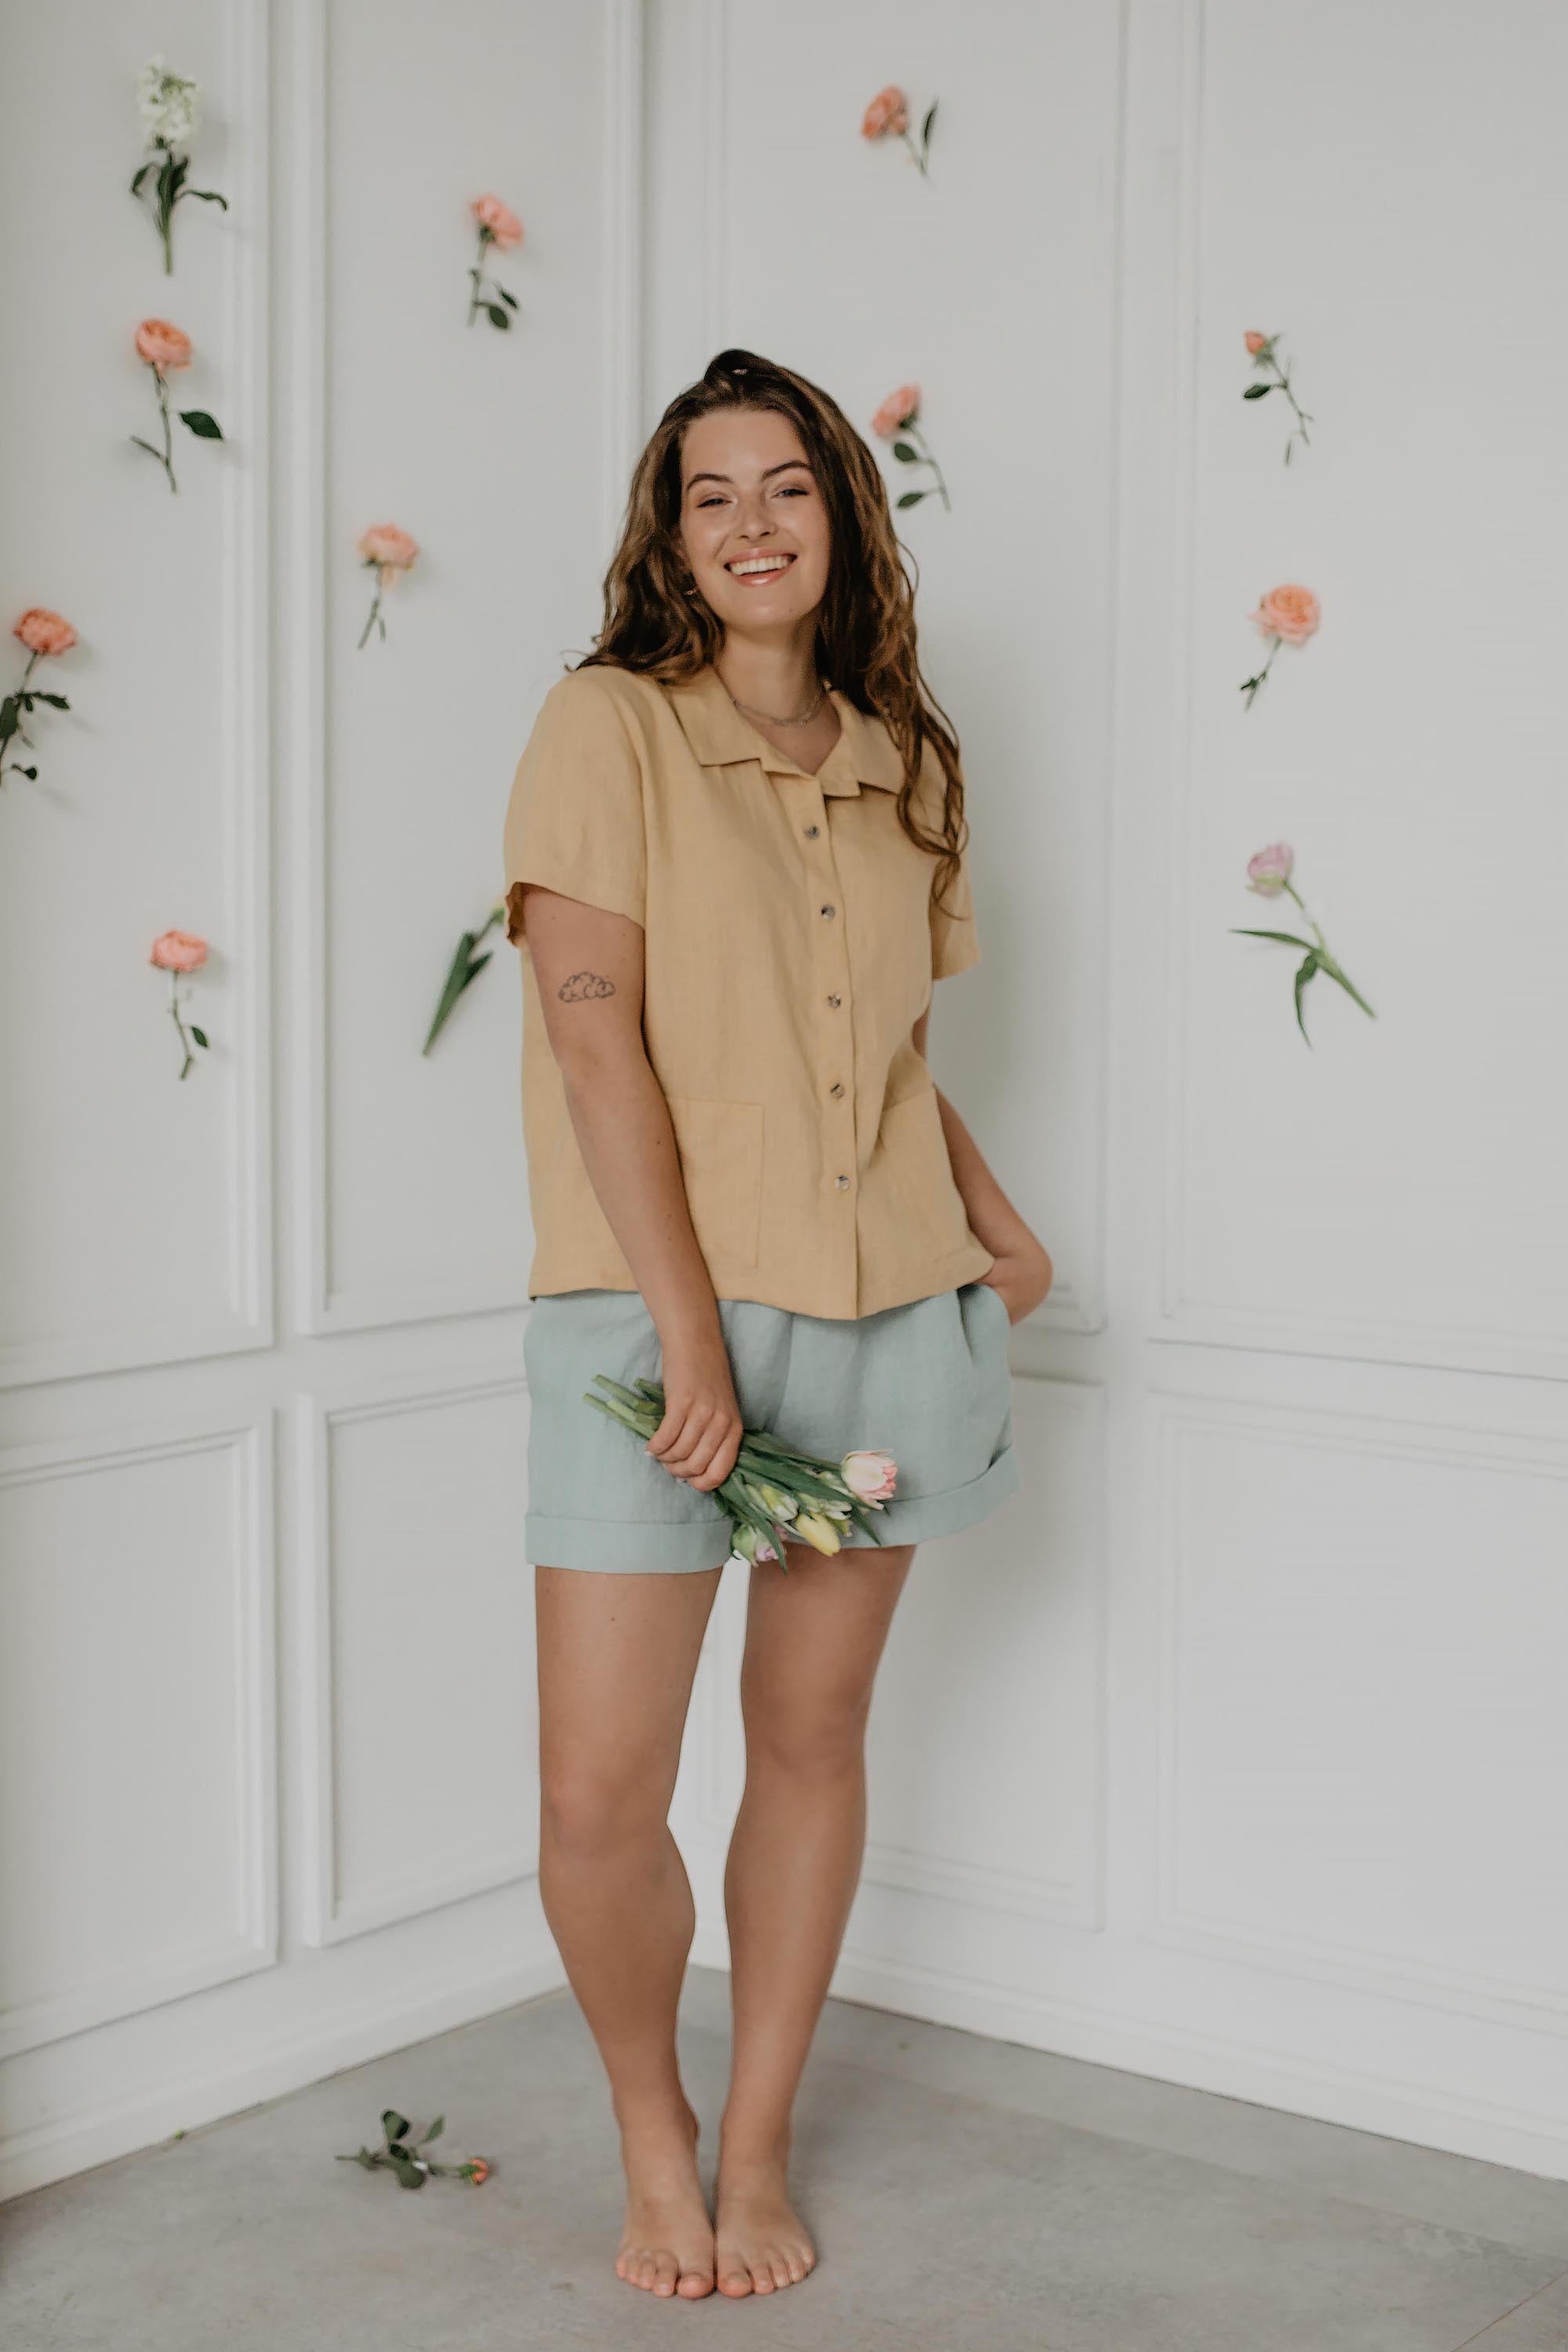 Woman Smiling In White Room With Flowers Wearing Mustard Summer Linen Shirt and Sage Green Shorts